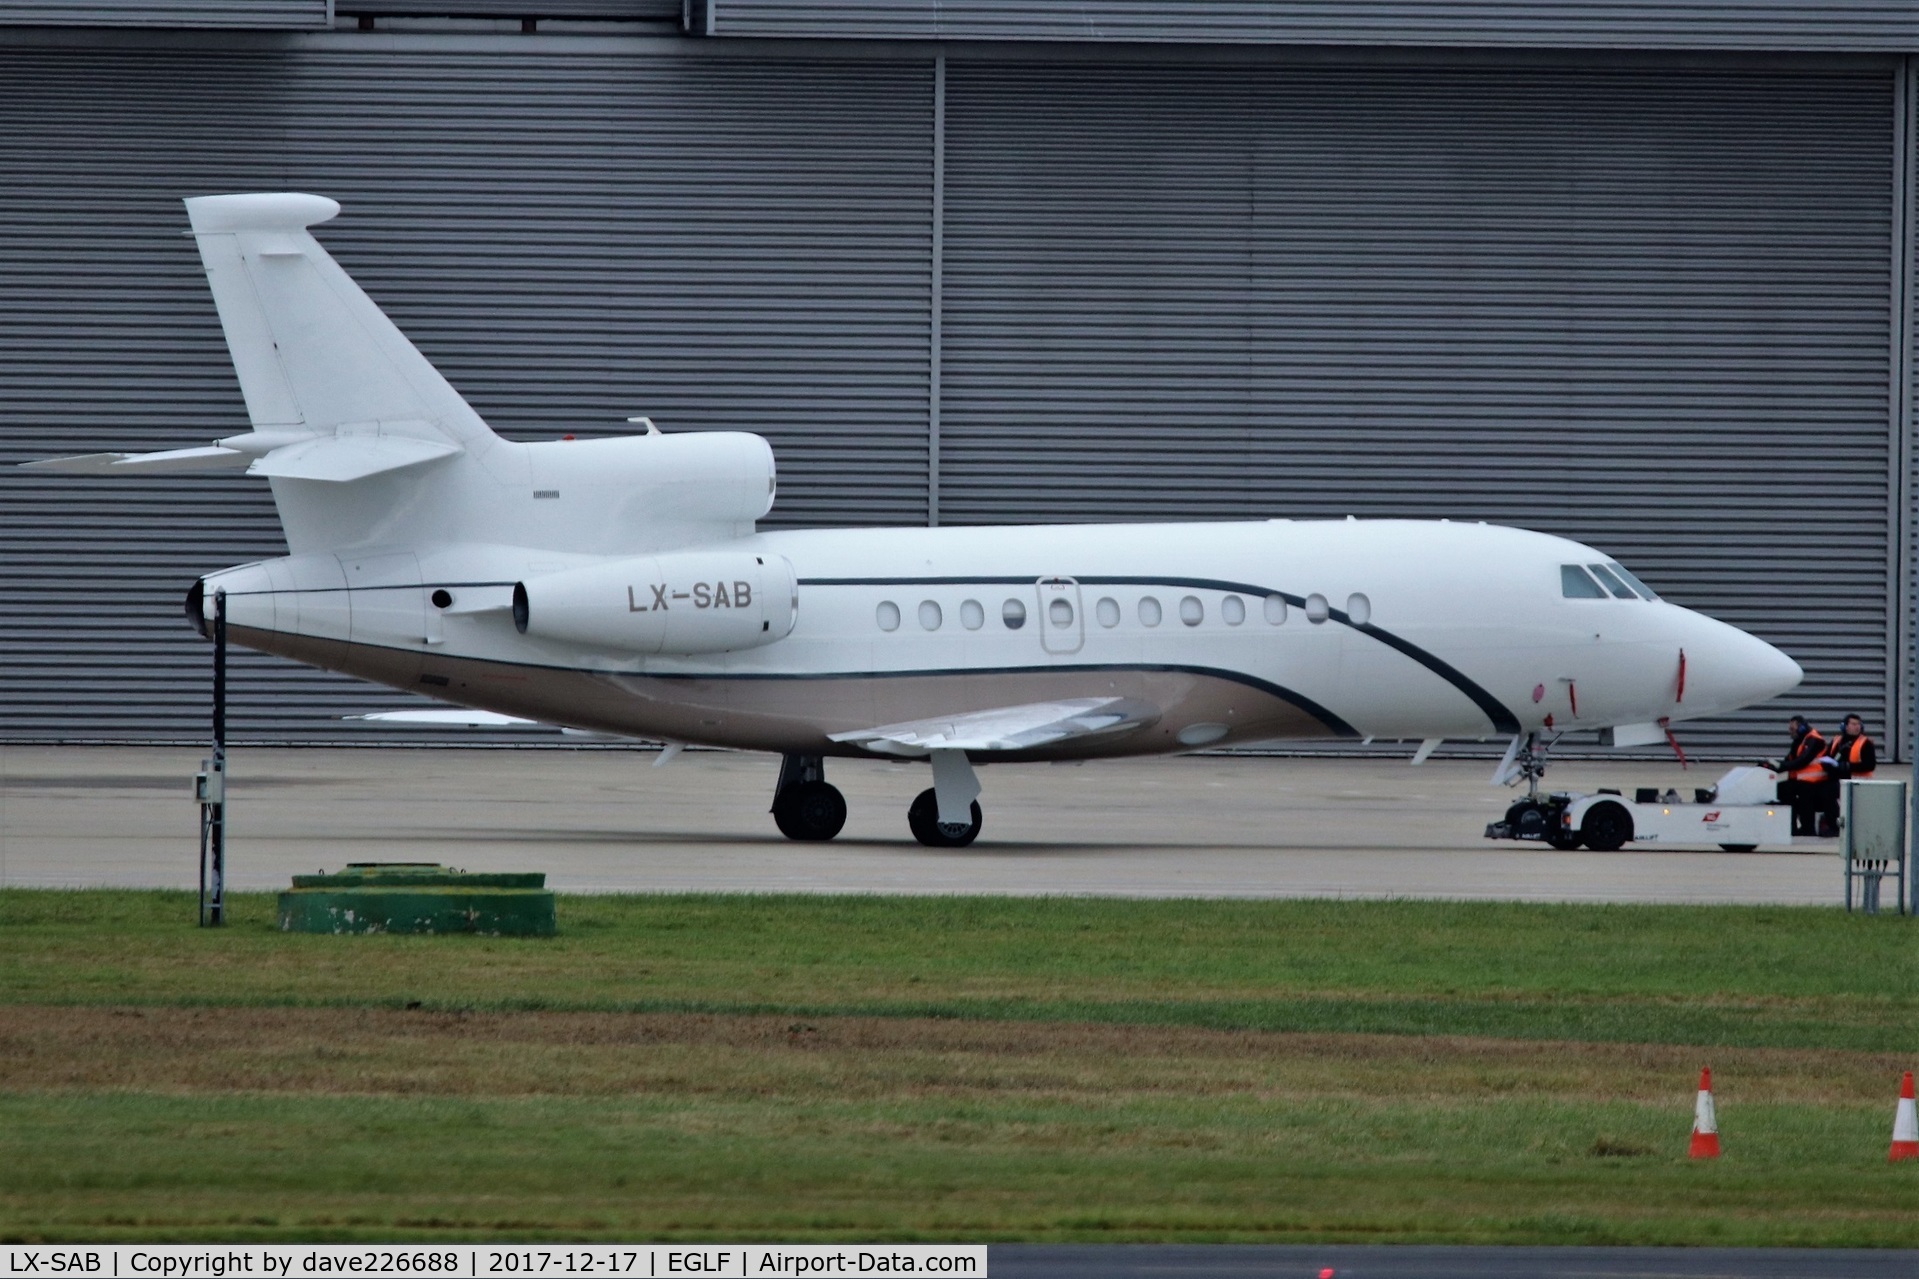 LX-SAB, 2008 Dassault Falcon 900DX C/N 619, LX SAB being towed out of hanger at Farnborough